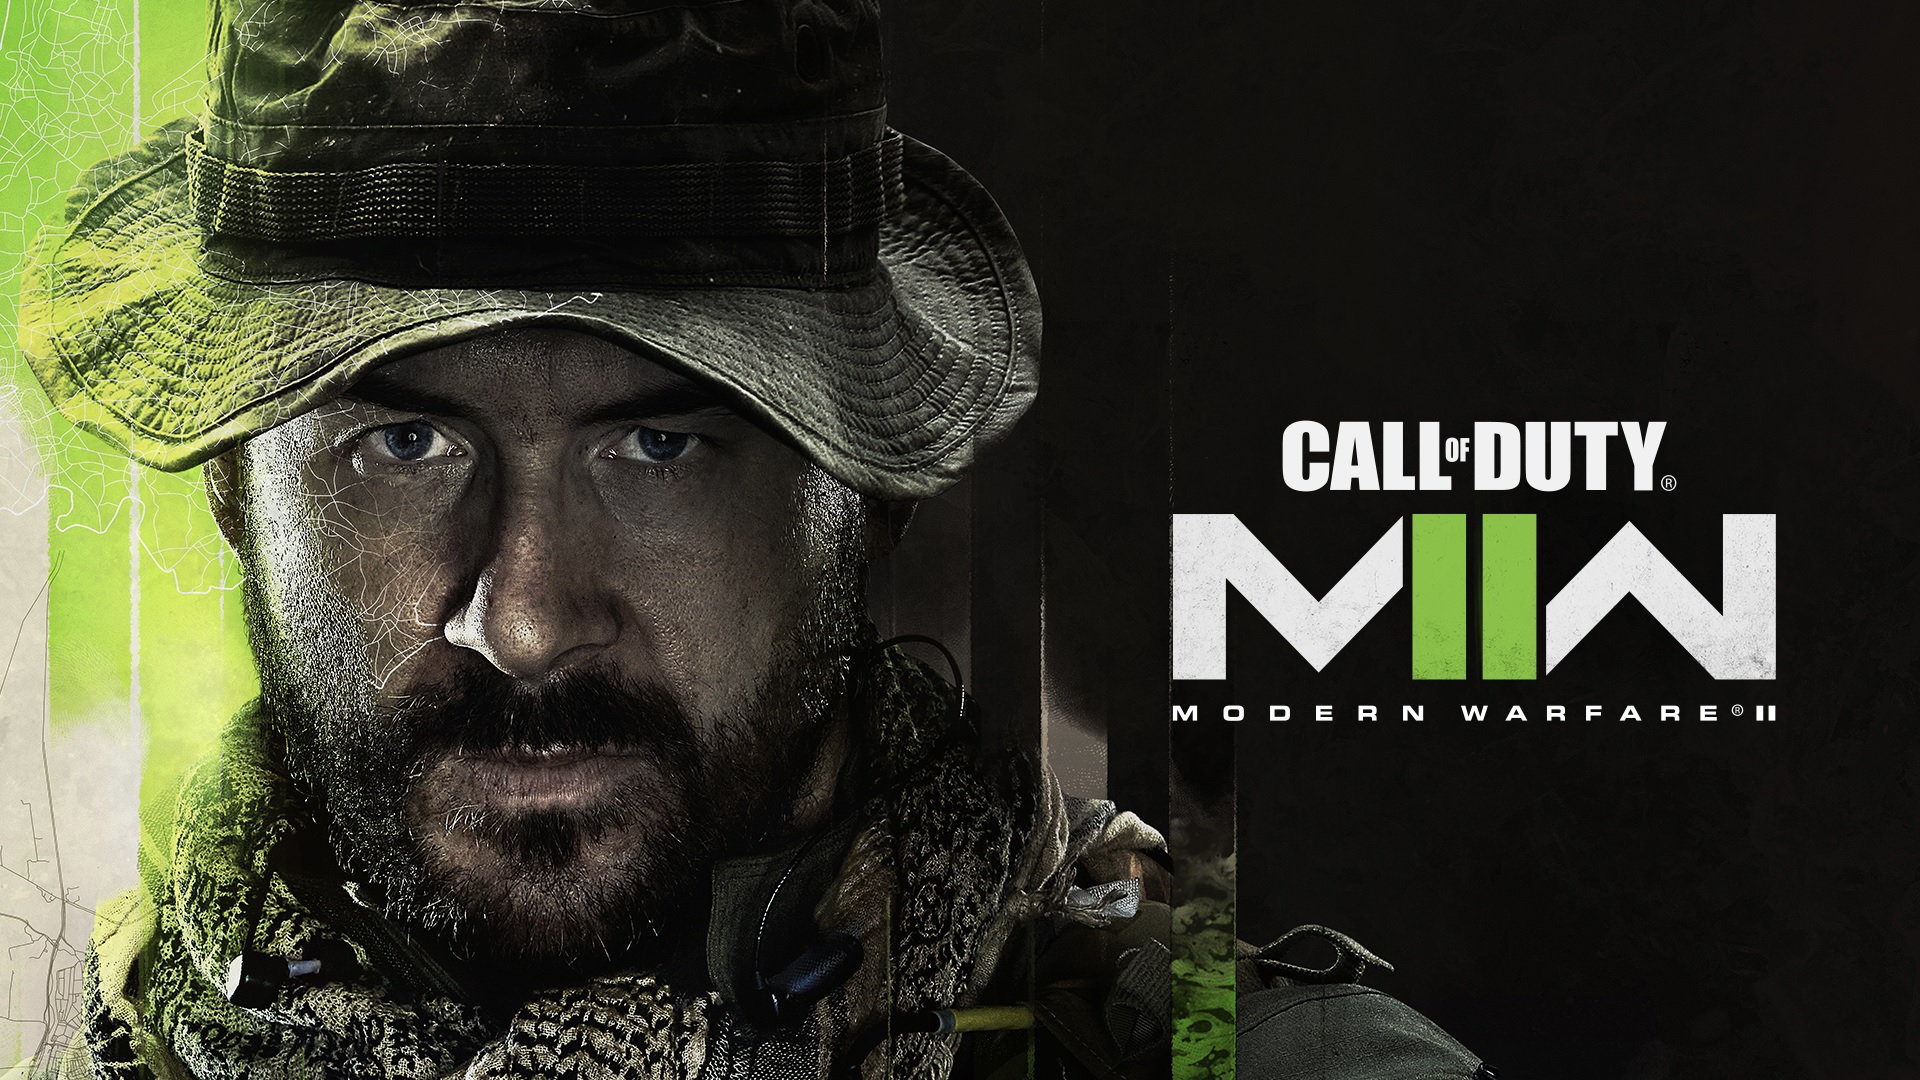 The Modern Warfare 2 beta was the biggest Call of Duty beta of all